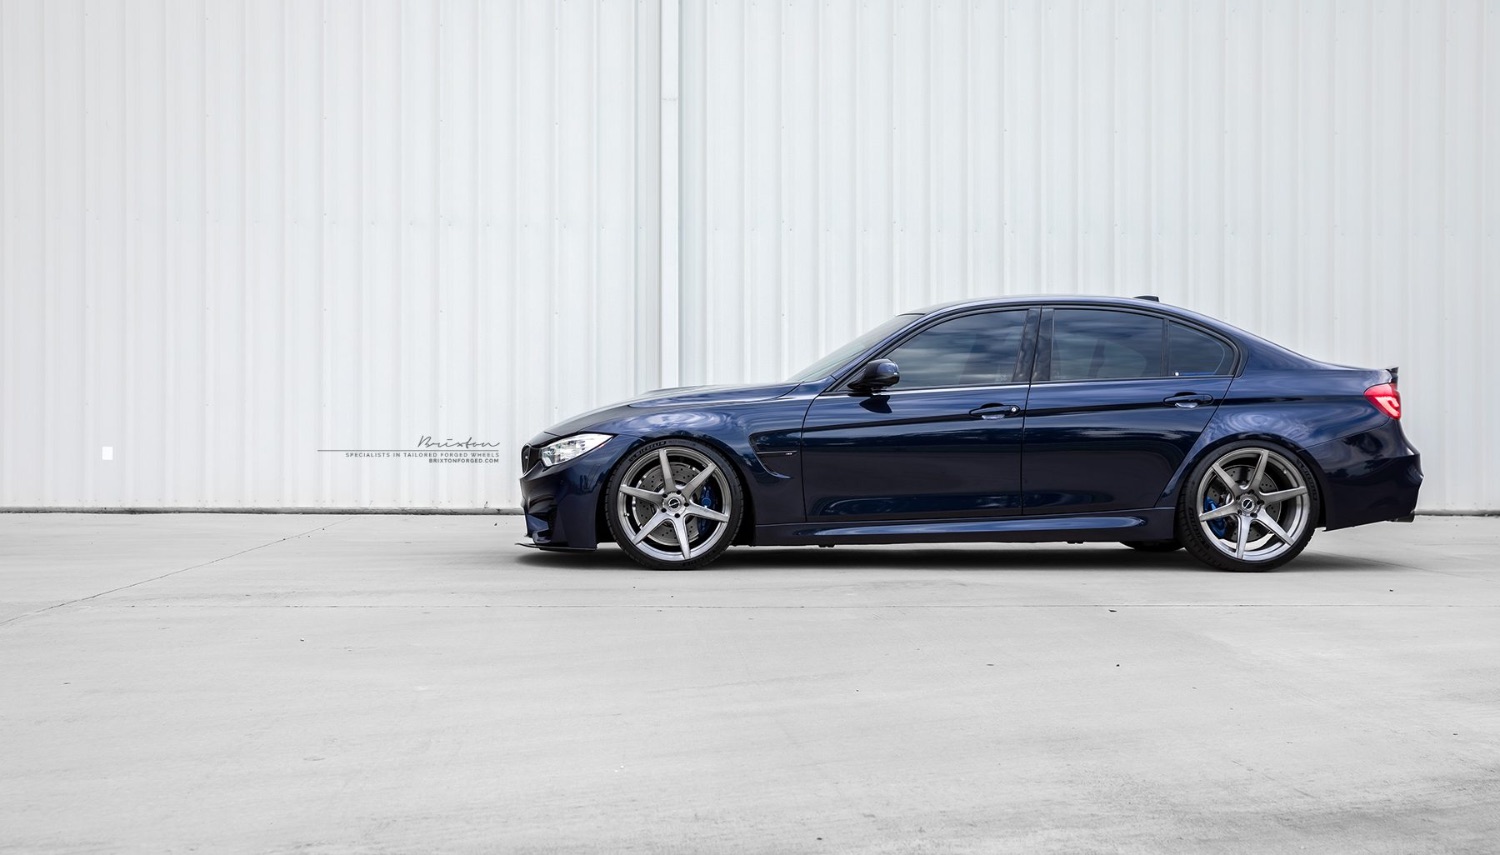 tanzanite-blue-m3-f80-bmw-brixton-forged-wheels-s60-ultrasport-brushed-double-tint-concave-1-piece-forged-wheels-13-1800x1027